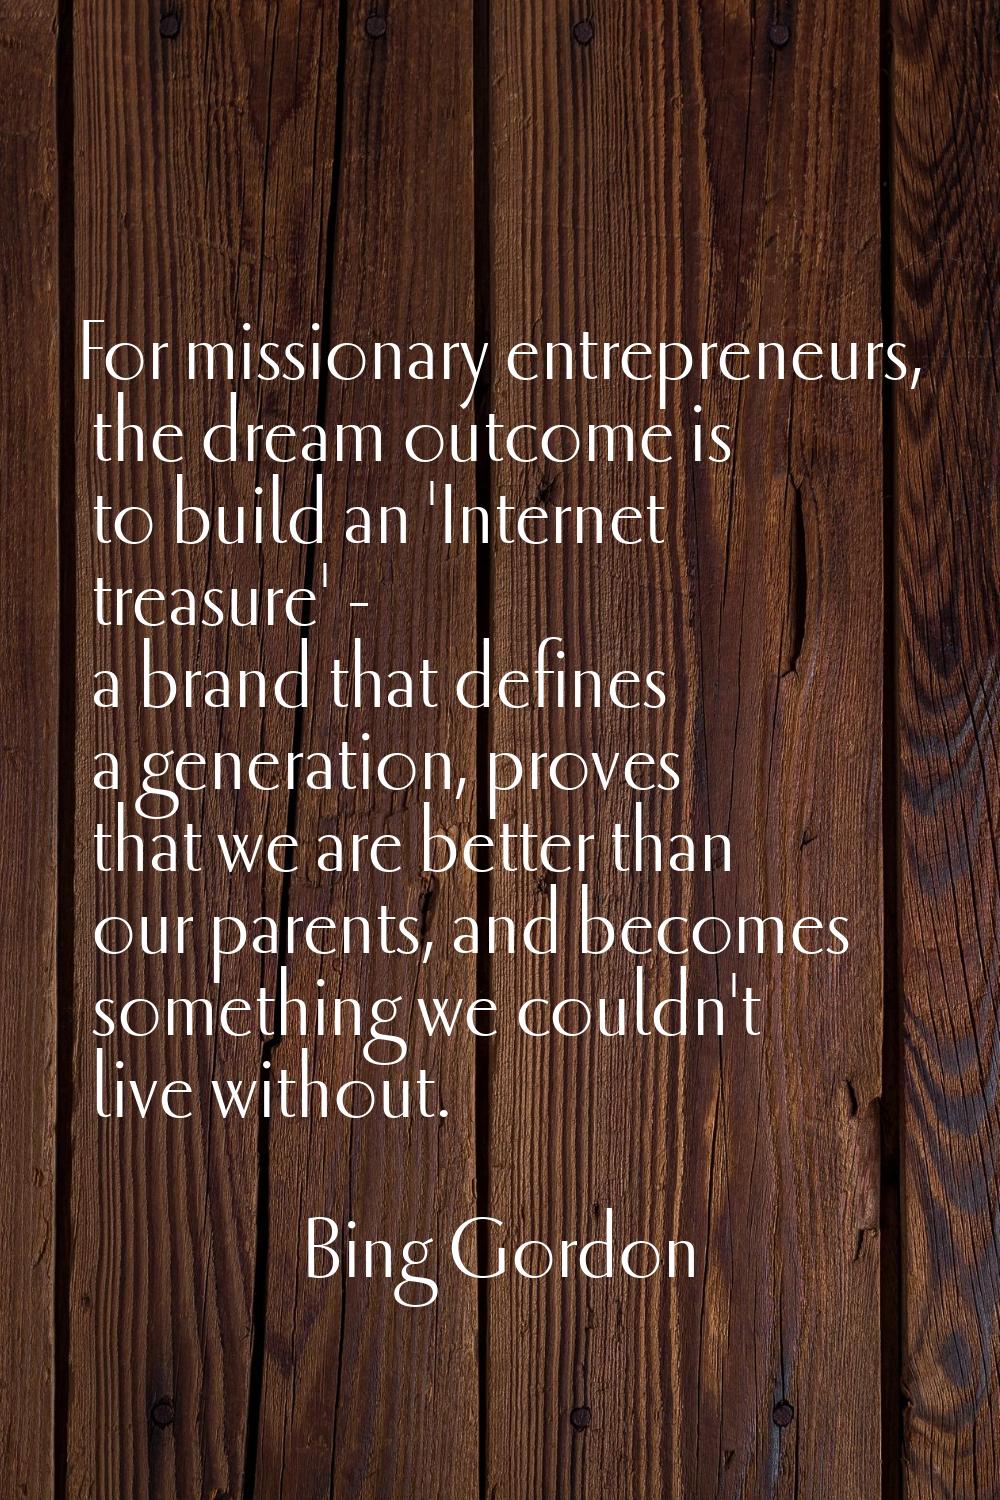 For missionary entrepreneurs, the dream outcome is to build an 'Internet treasure' - a brand that d